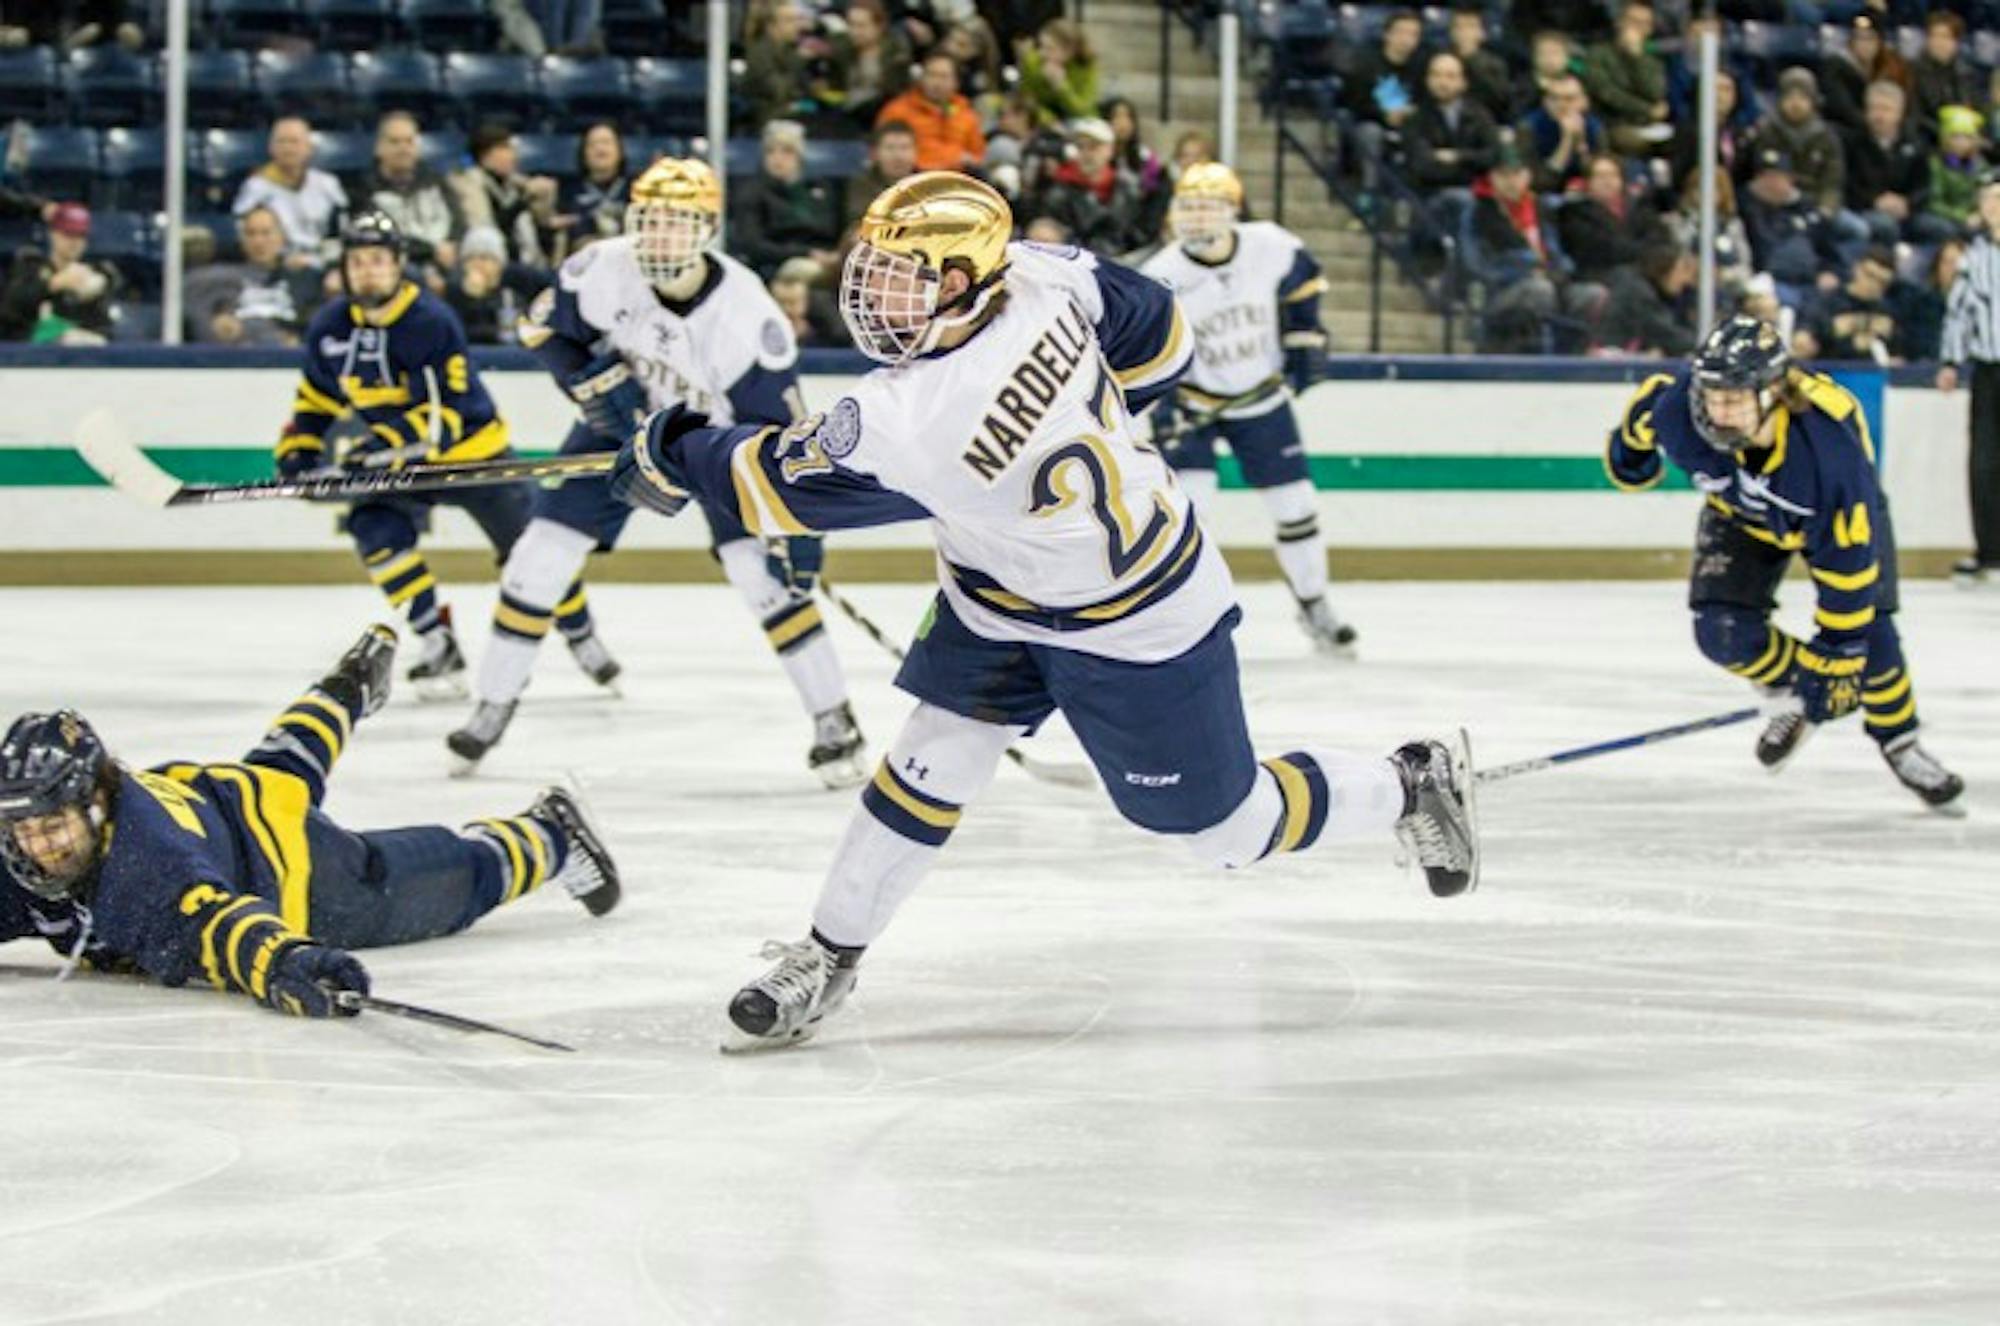 Irish freshman defenseman Bobby Nardella takes a shot during Notre Dame’s 7-2 victory over Merrimack at Compton Family Ice Arena. Nardella is currently riding a seven-game point streak.